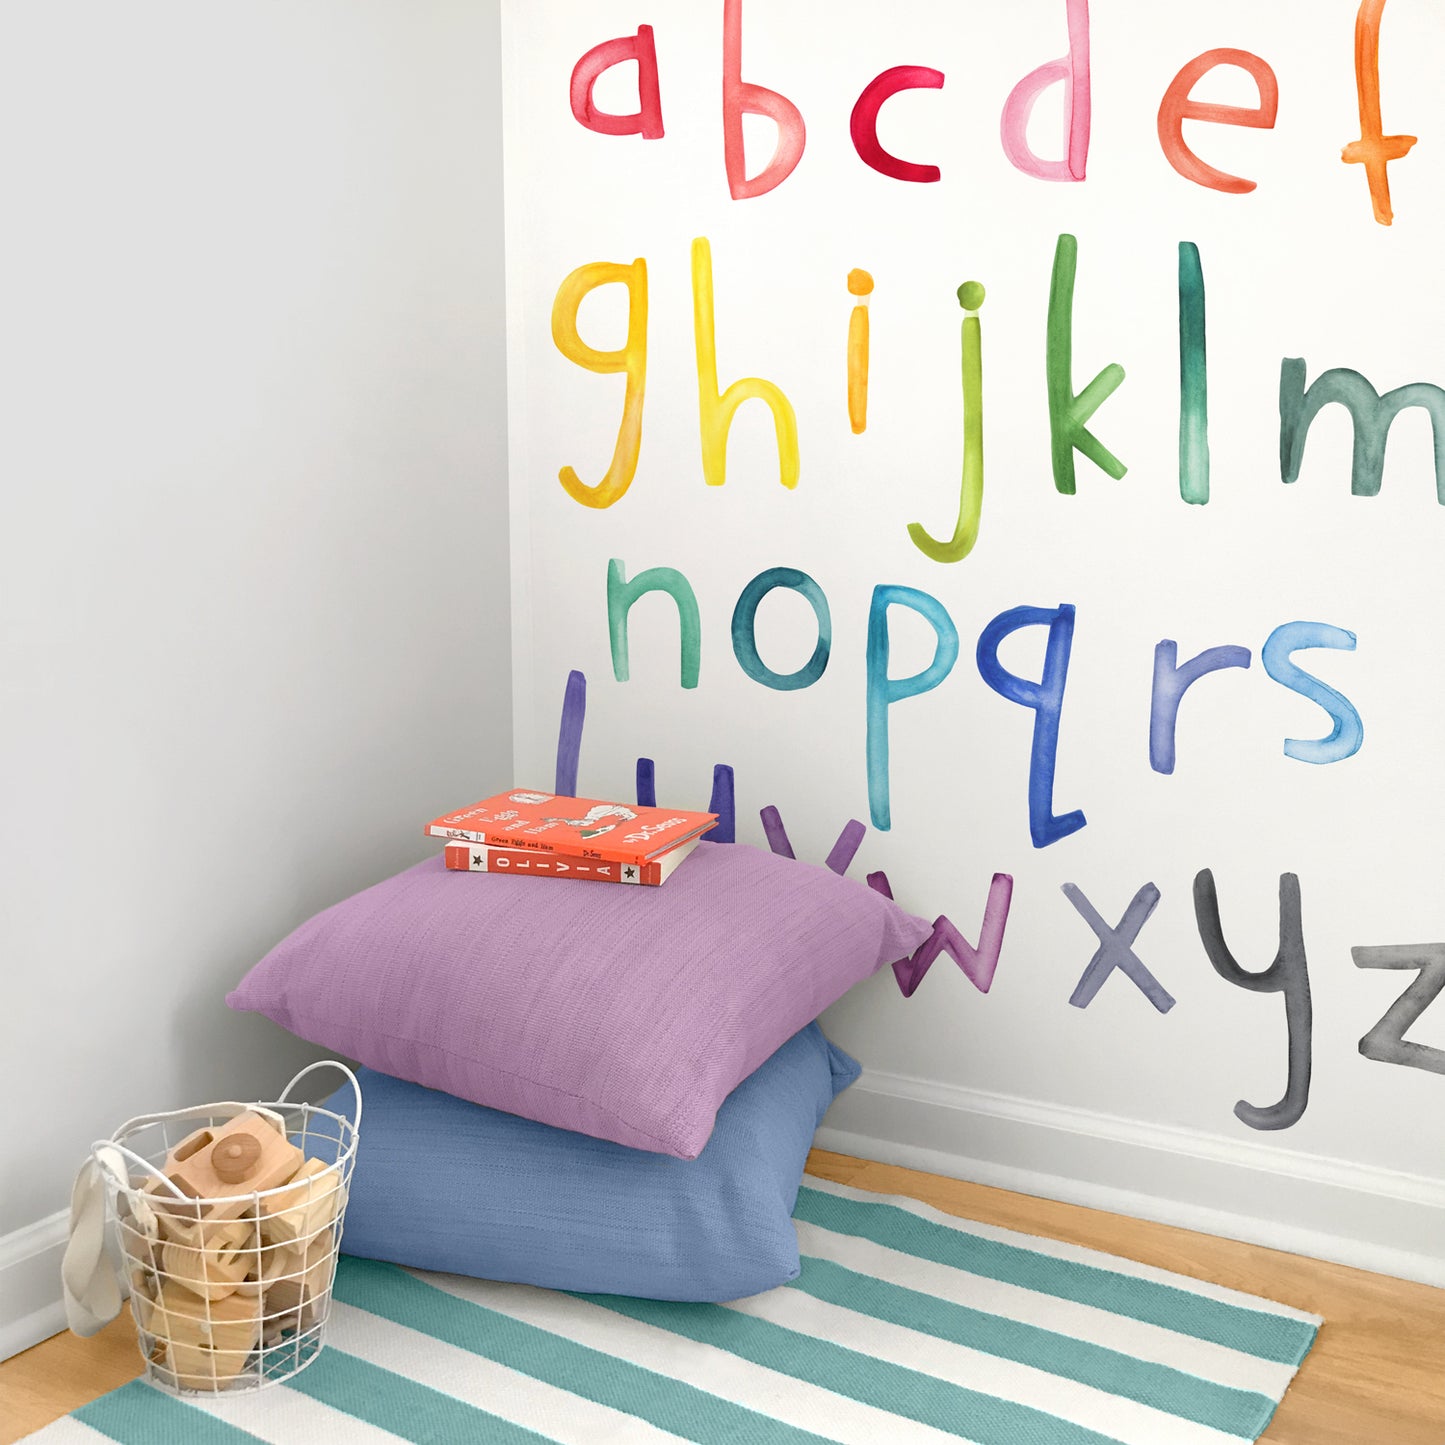 Lowercase Rainbow Watercolor Letters